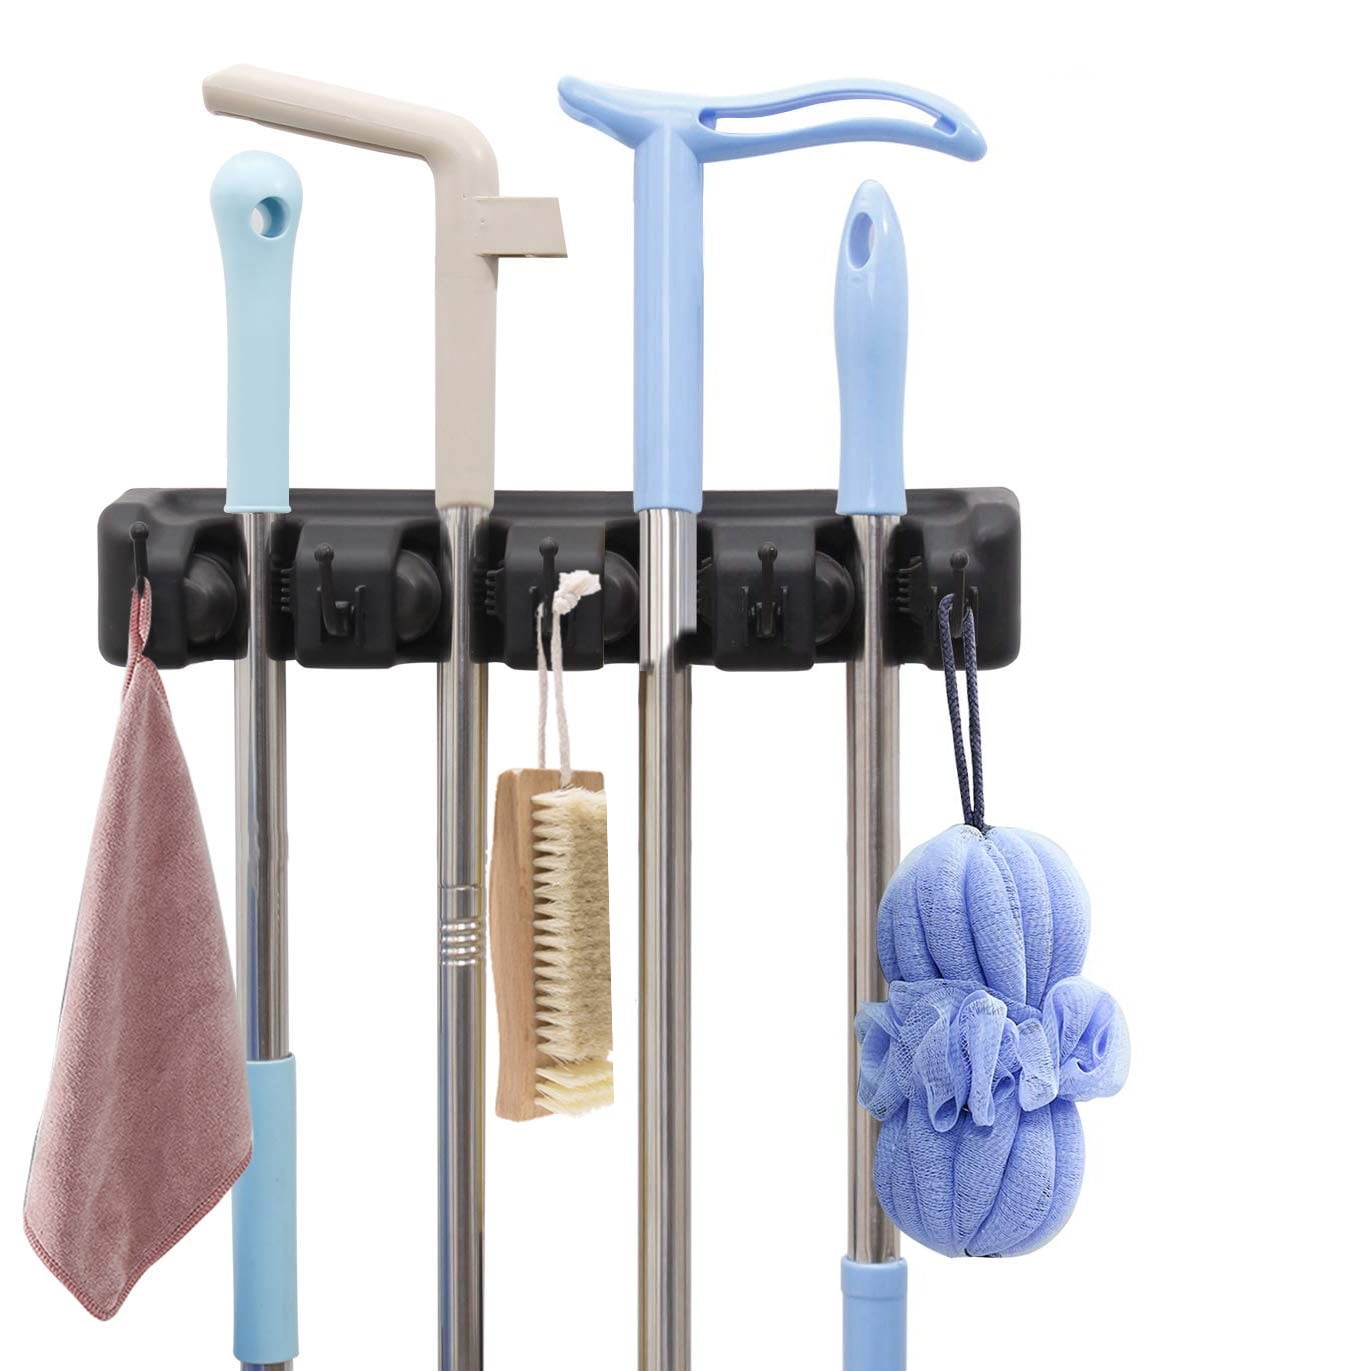 2 Packs Mops and Broom Hanger for Bathroom Kitchen Garden and Garage Mop Broom Holders with Hooks Self Adhesive Wall Mounted Home Organizer & Tool Storage Mops Hooks with Spring Clip